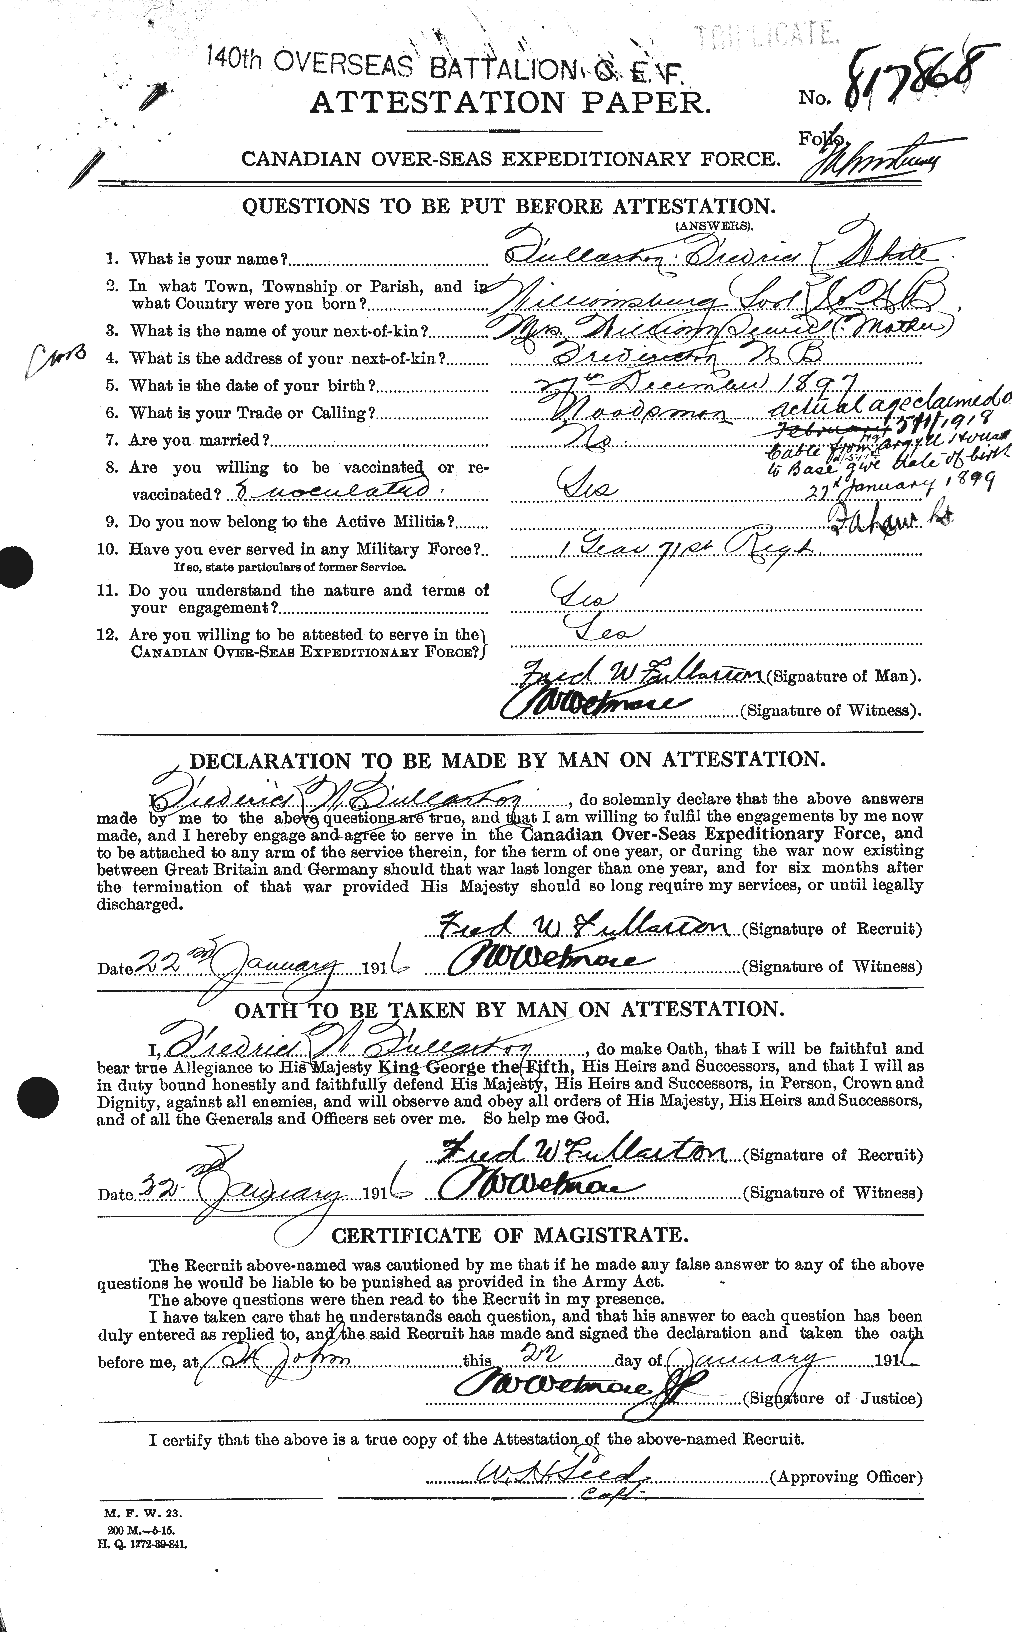 Personnel Records of the First World War - CEF 341253a